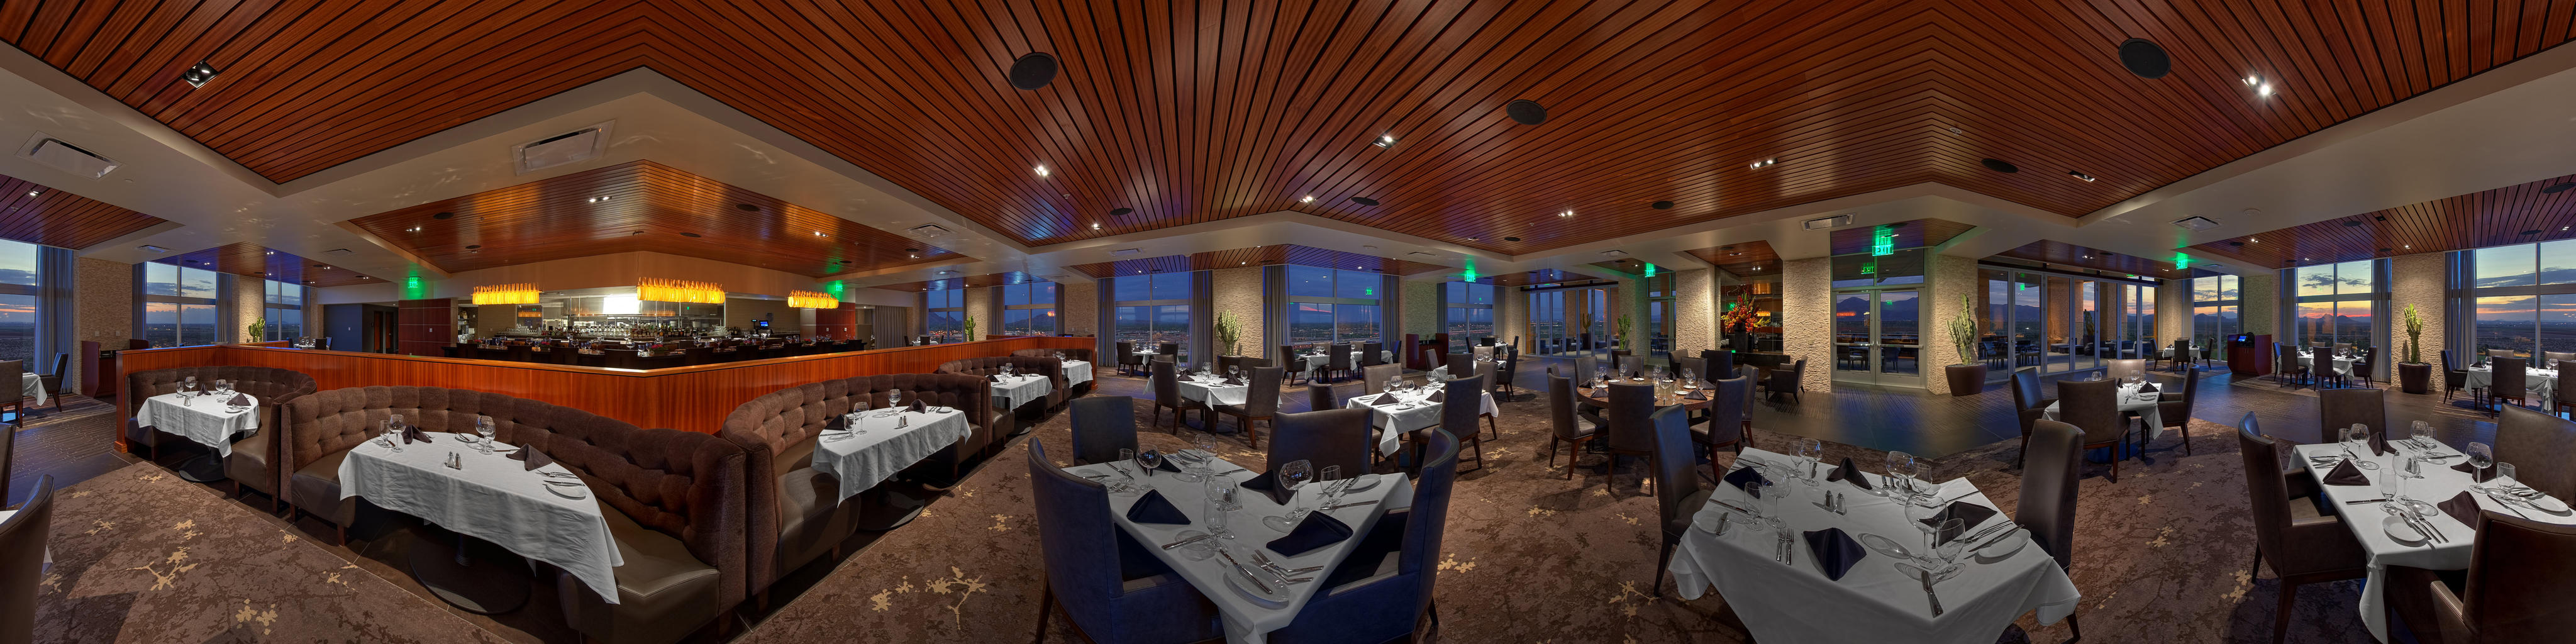 Talking Stick Resort - Hotel Meeting Space - Event Facilities